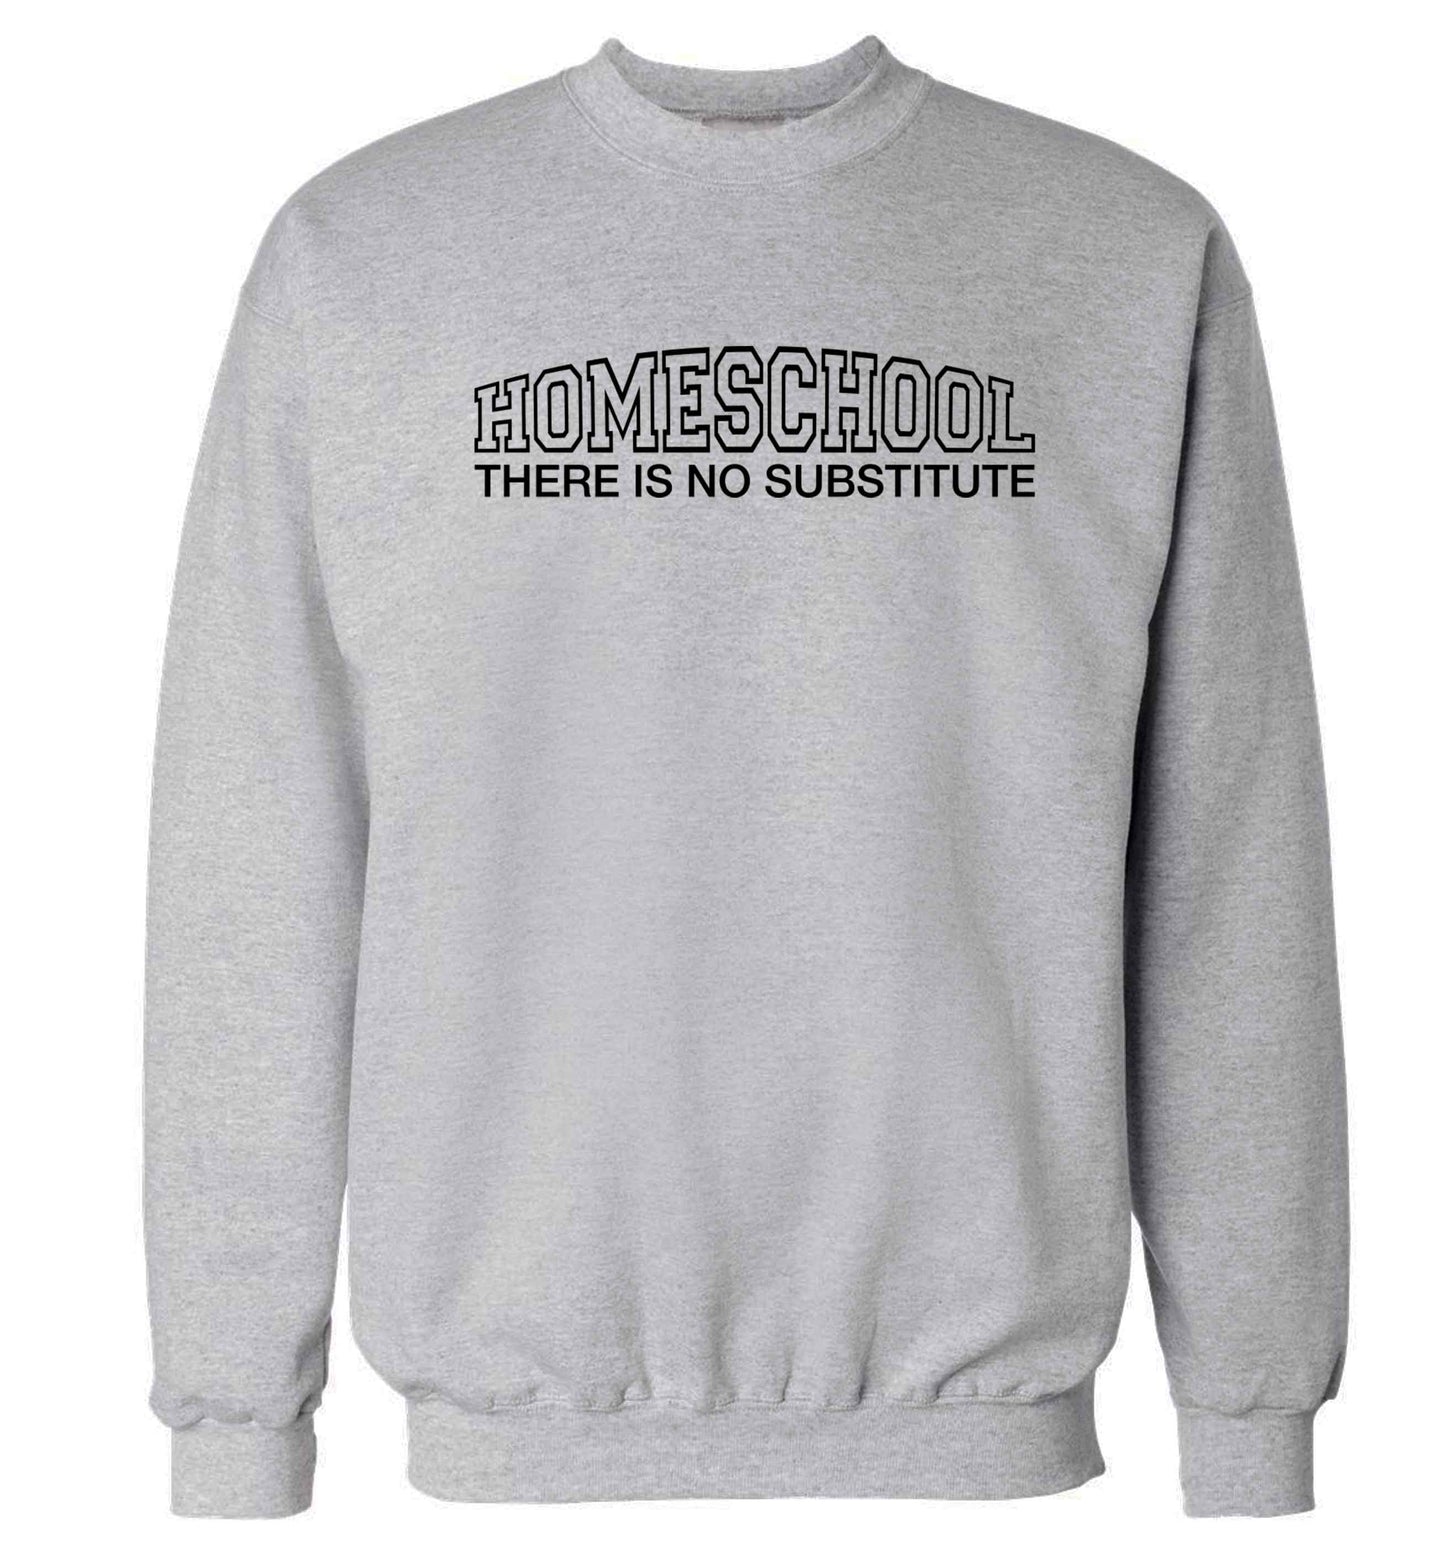 Homeschool there is not substitute Adult's unisex grey Sweater 2XL